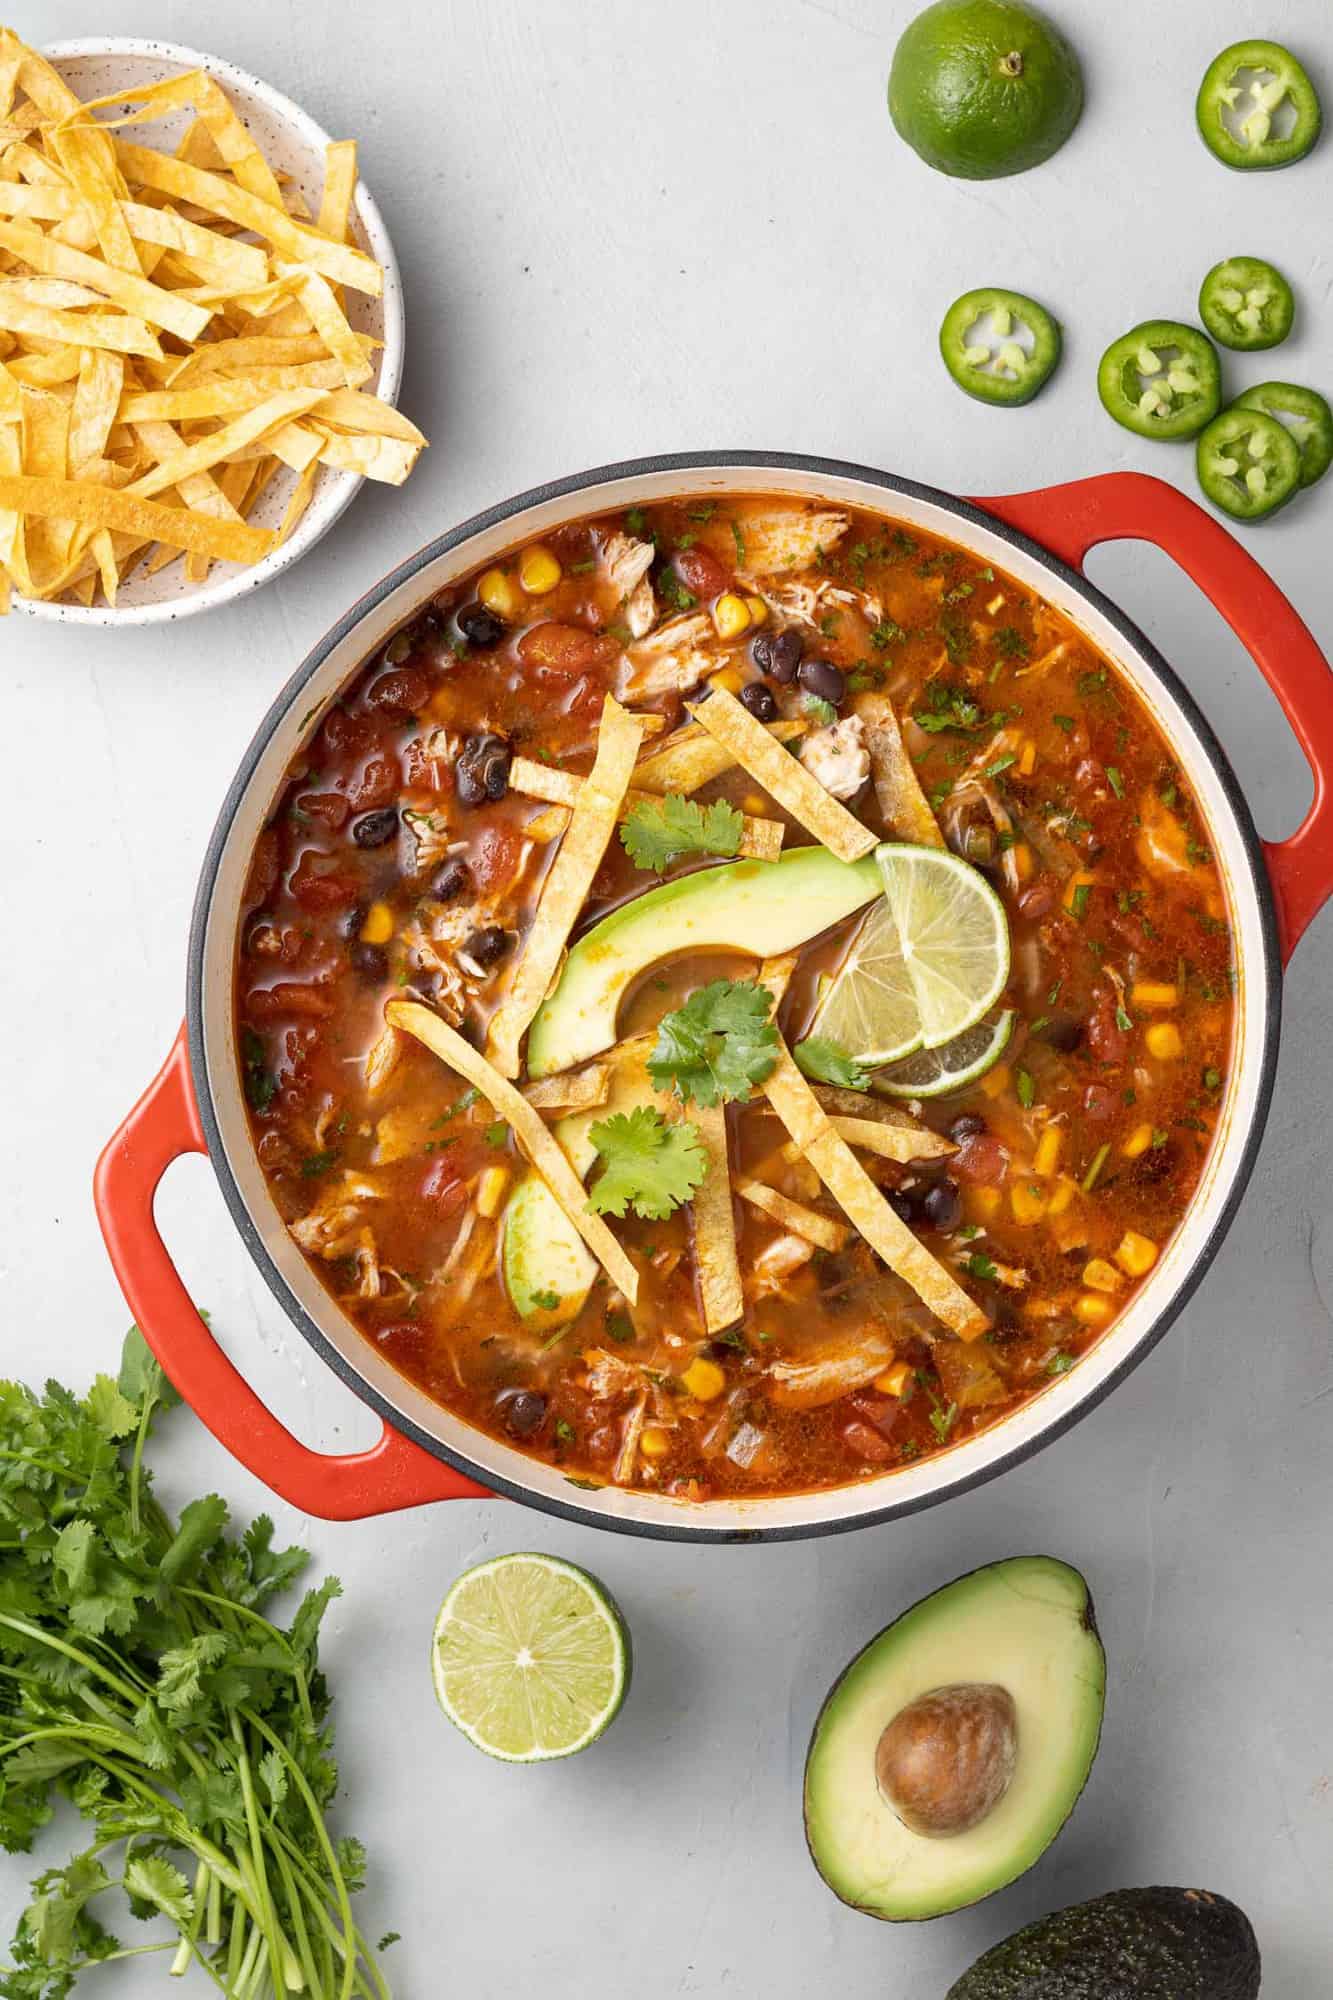 Large red dutch oven filled with chicken tortilla soup and fun garnishes.